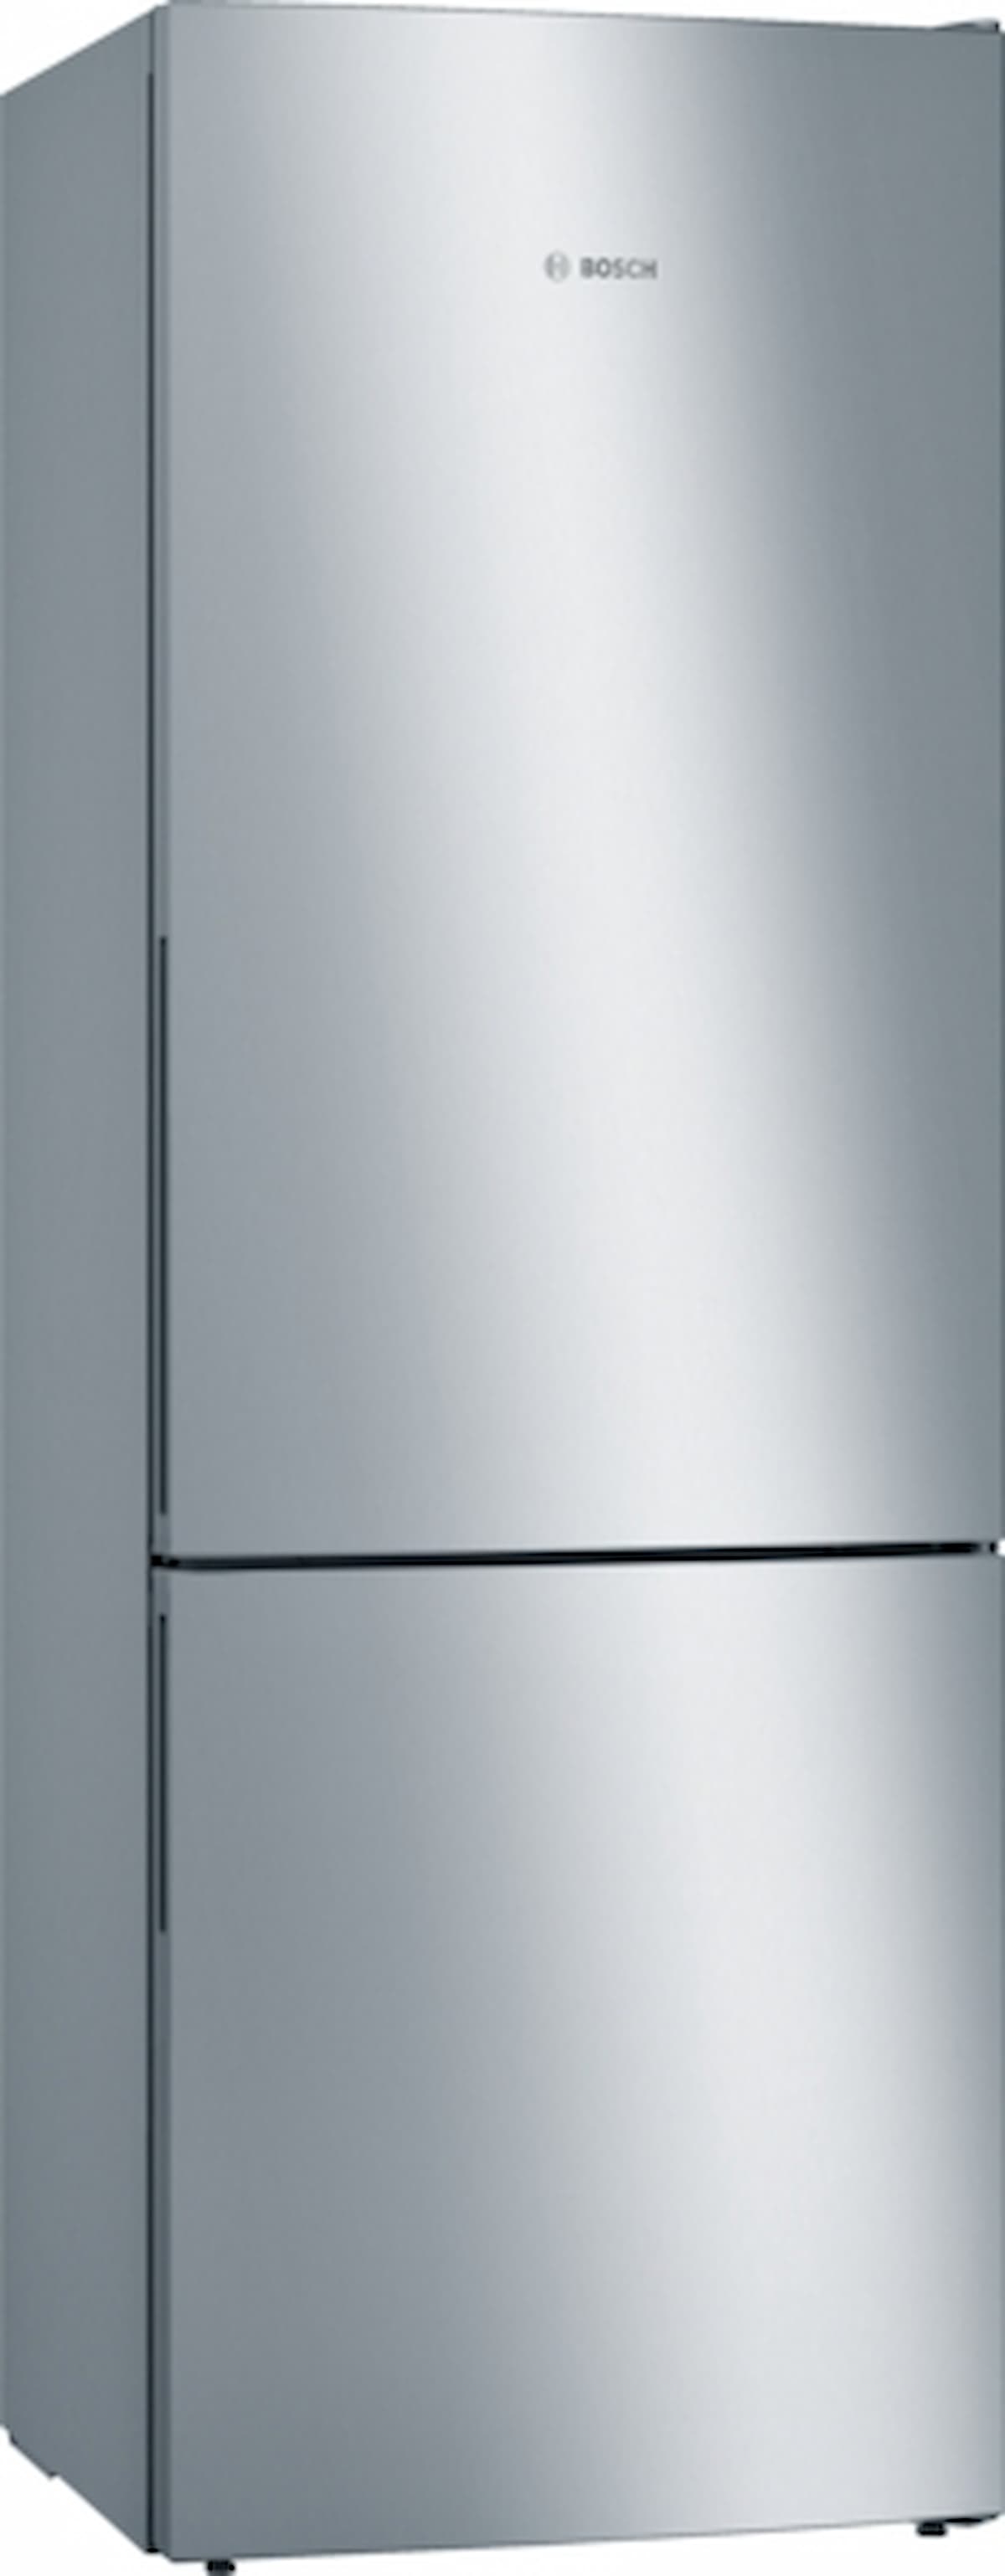 Bosch Series 6, free-standing fridge-freezer with freezer at bottom, 201 x 70 cm, Stainless steel (with anti-fingerprint)-KGE49AICAG